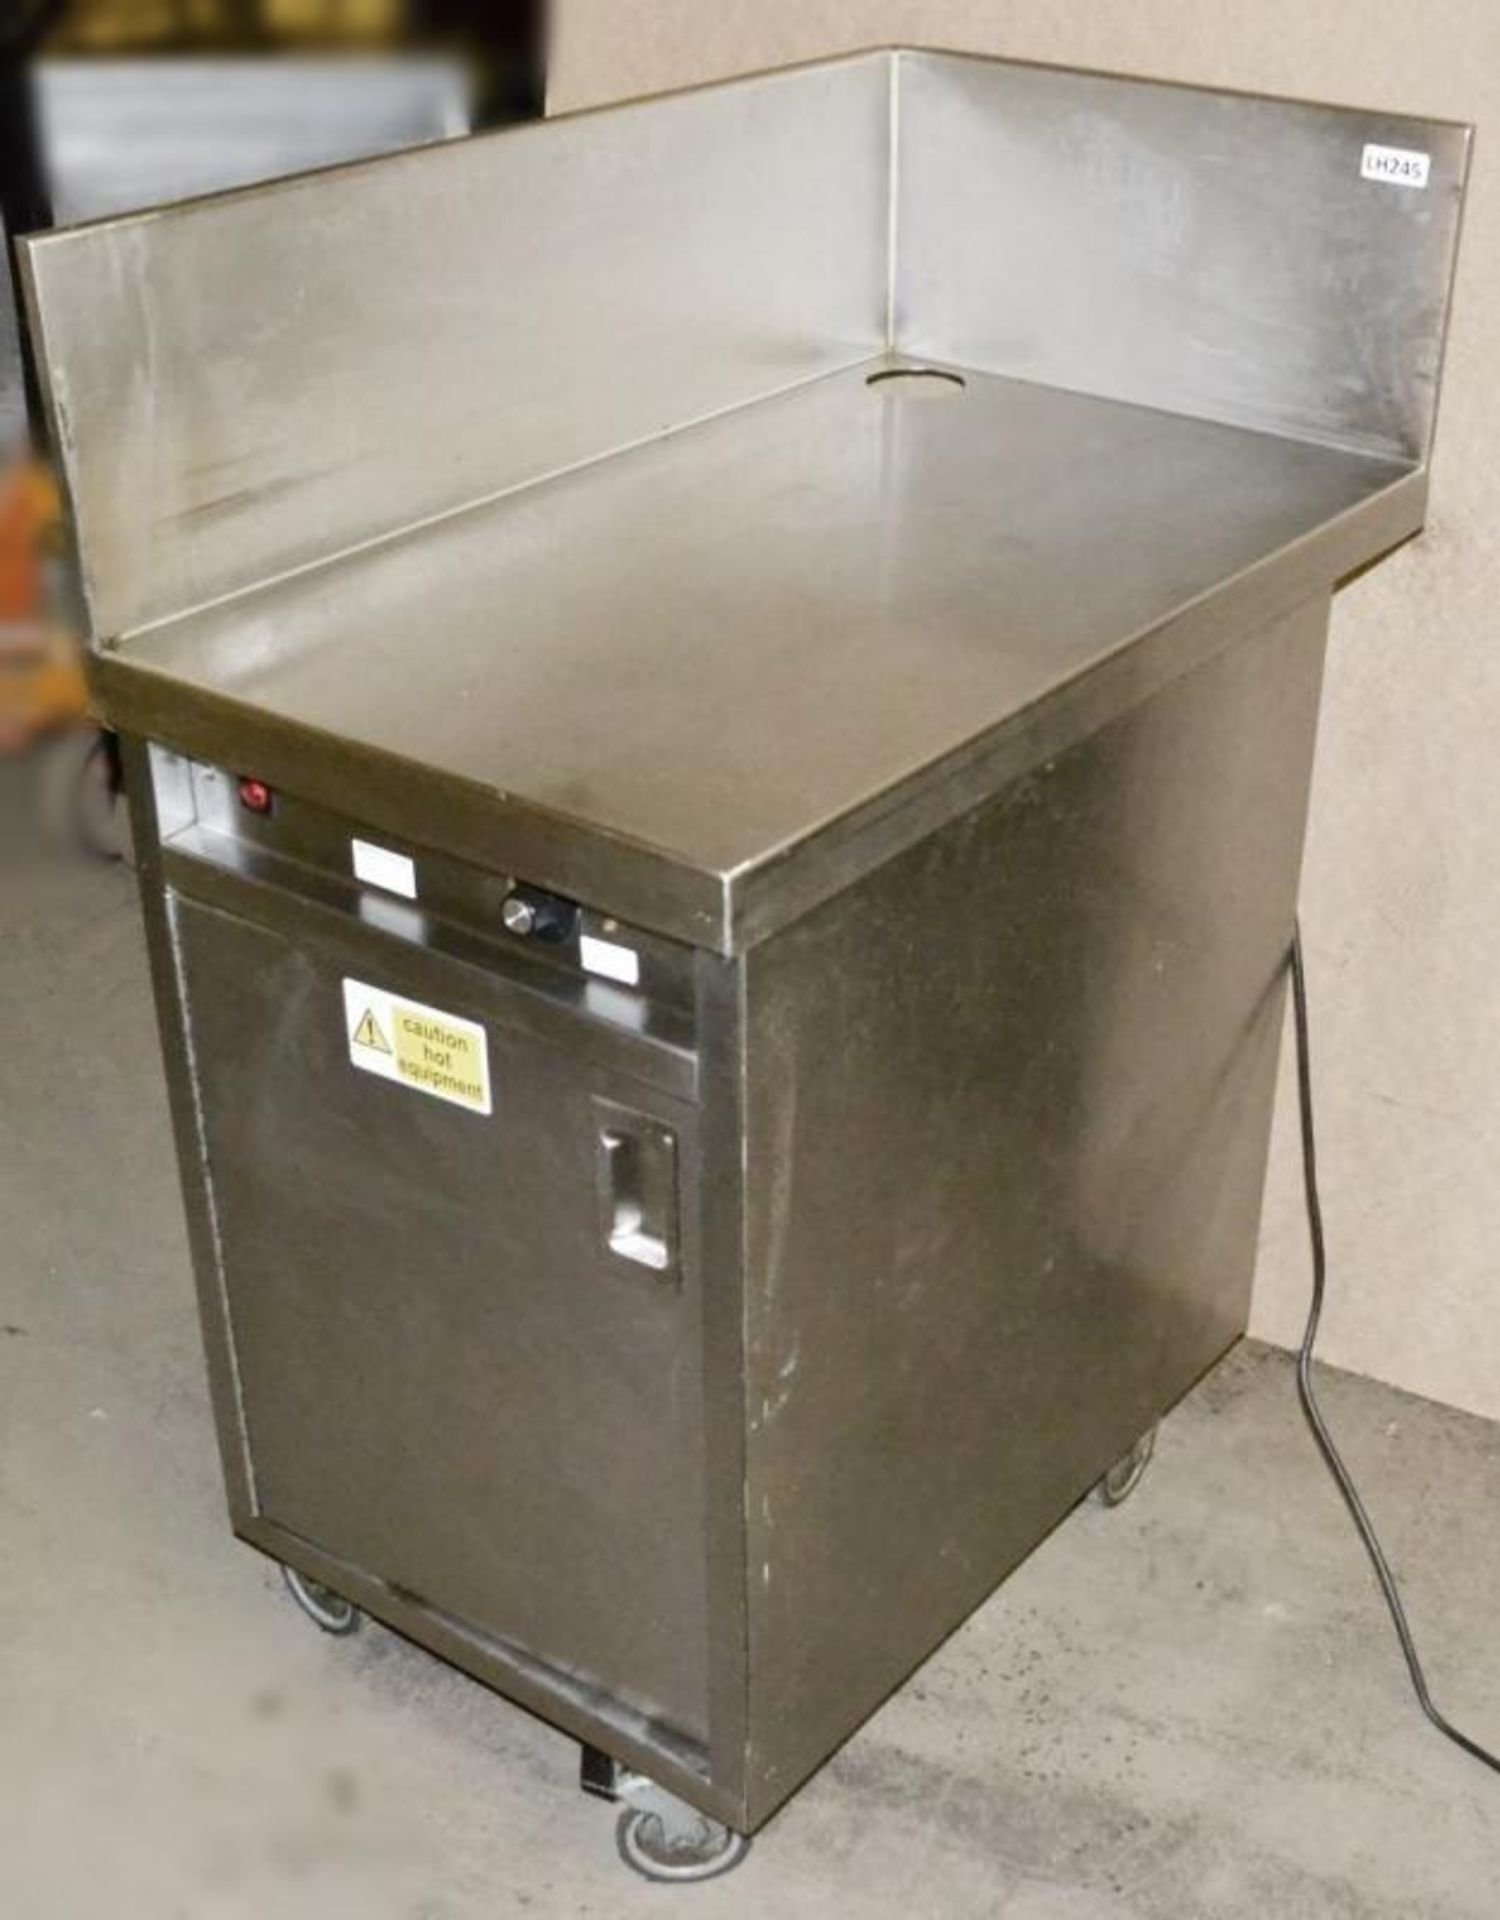 1 x Stainless Steel Commercial Hot Cupboard With Corner Spashback - Dimensions: 85 x 50 x H110cm - - Image 2 of 4